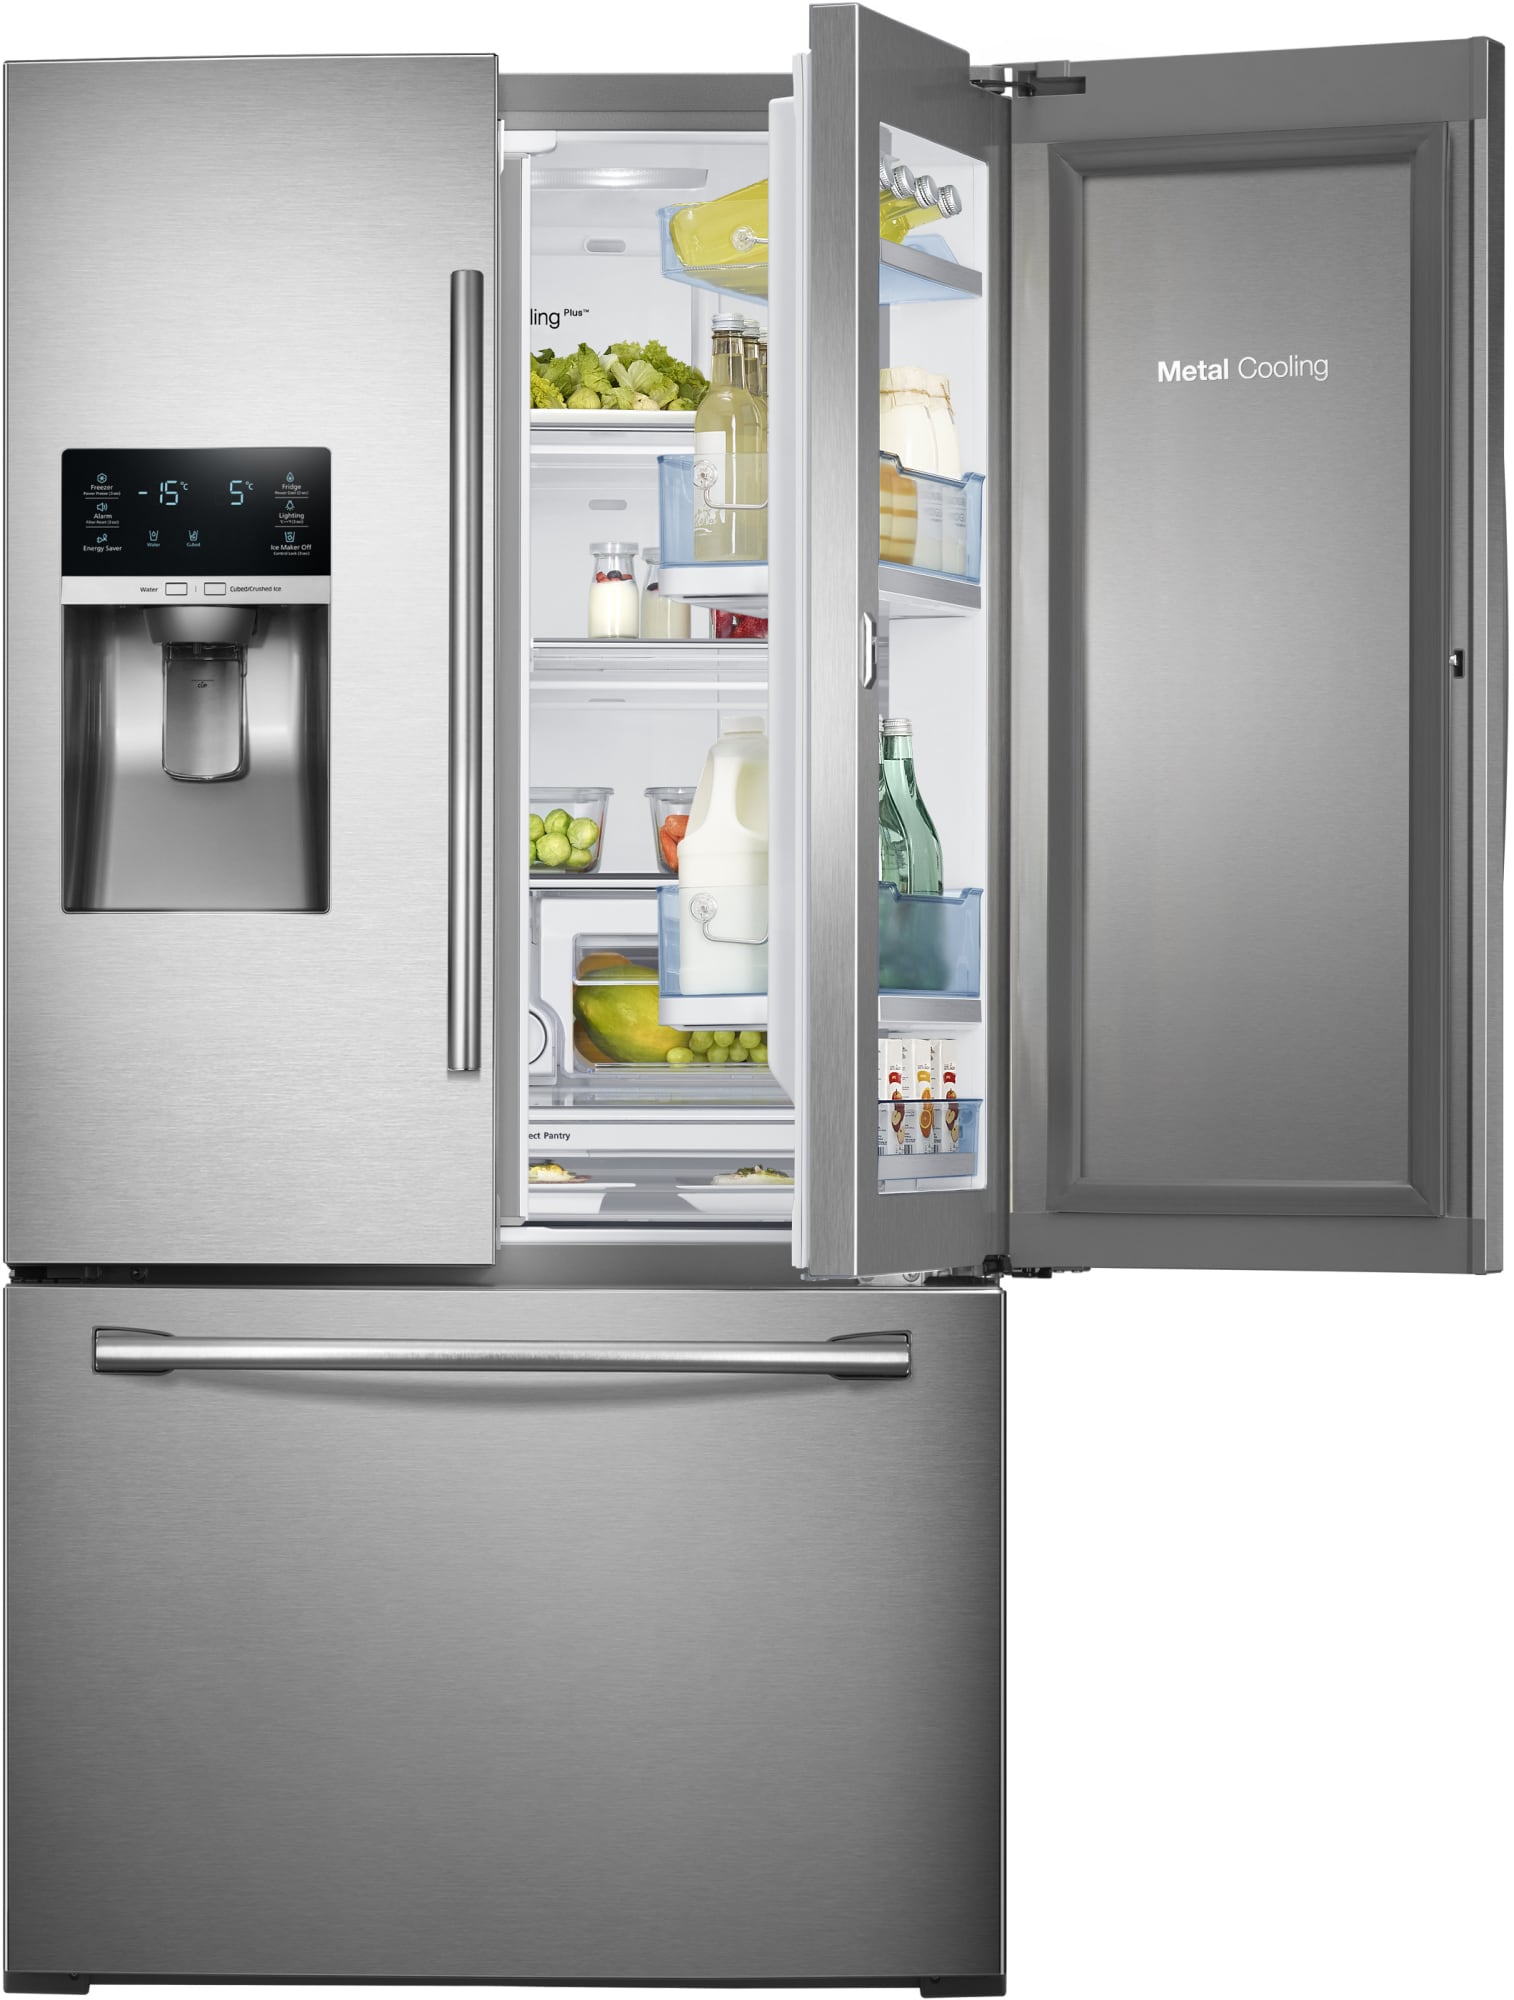 How To Remove Glass Shelves From A Samsung Fridge – Press To Cook